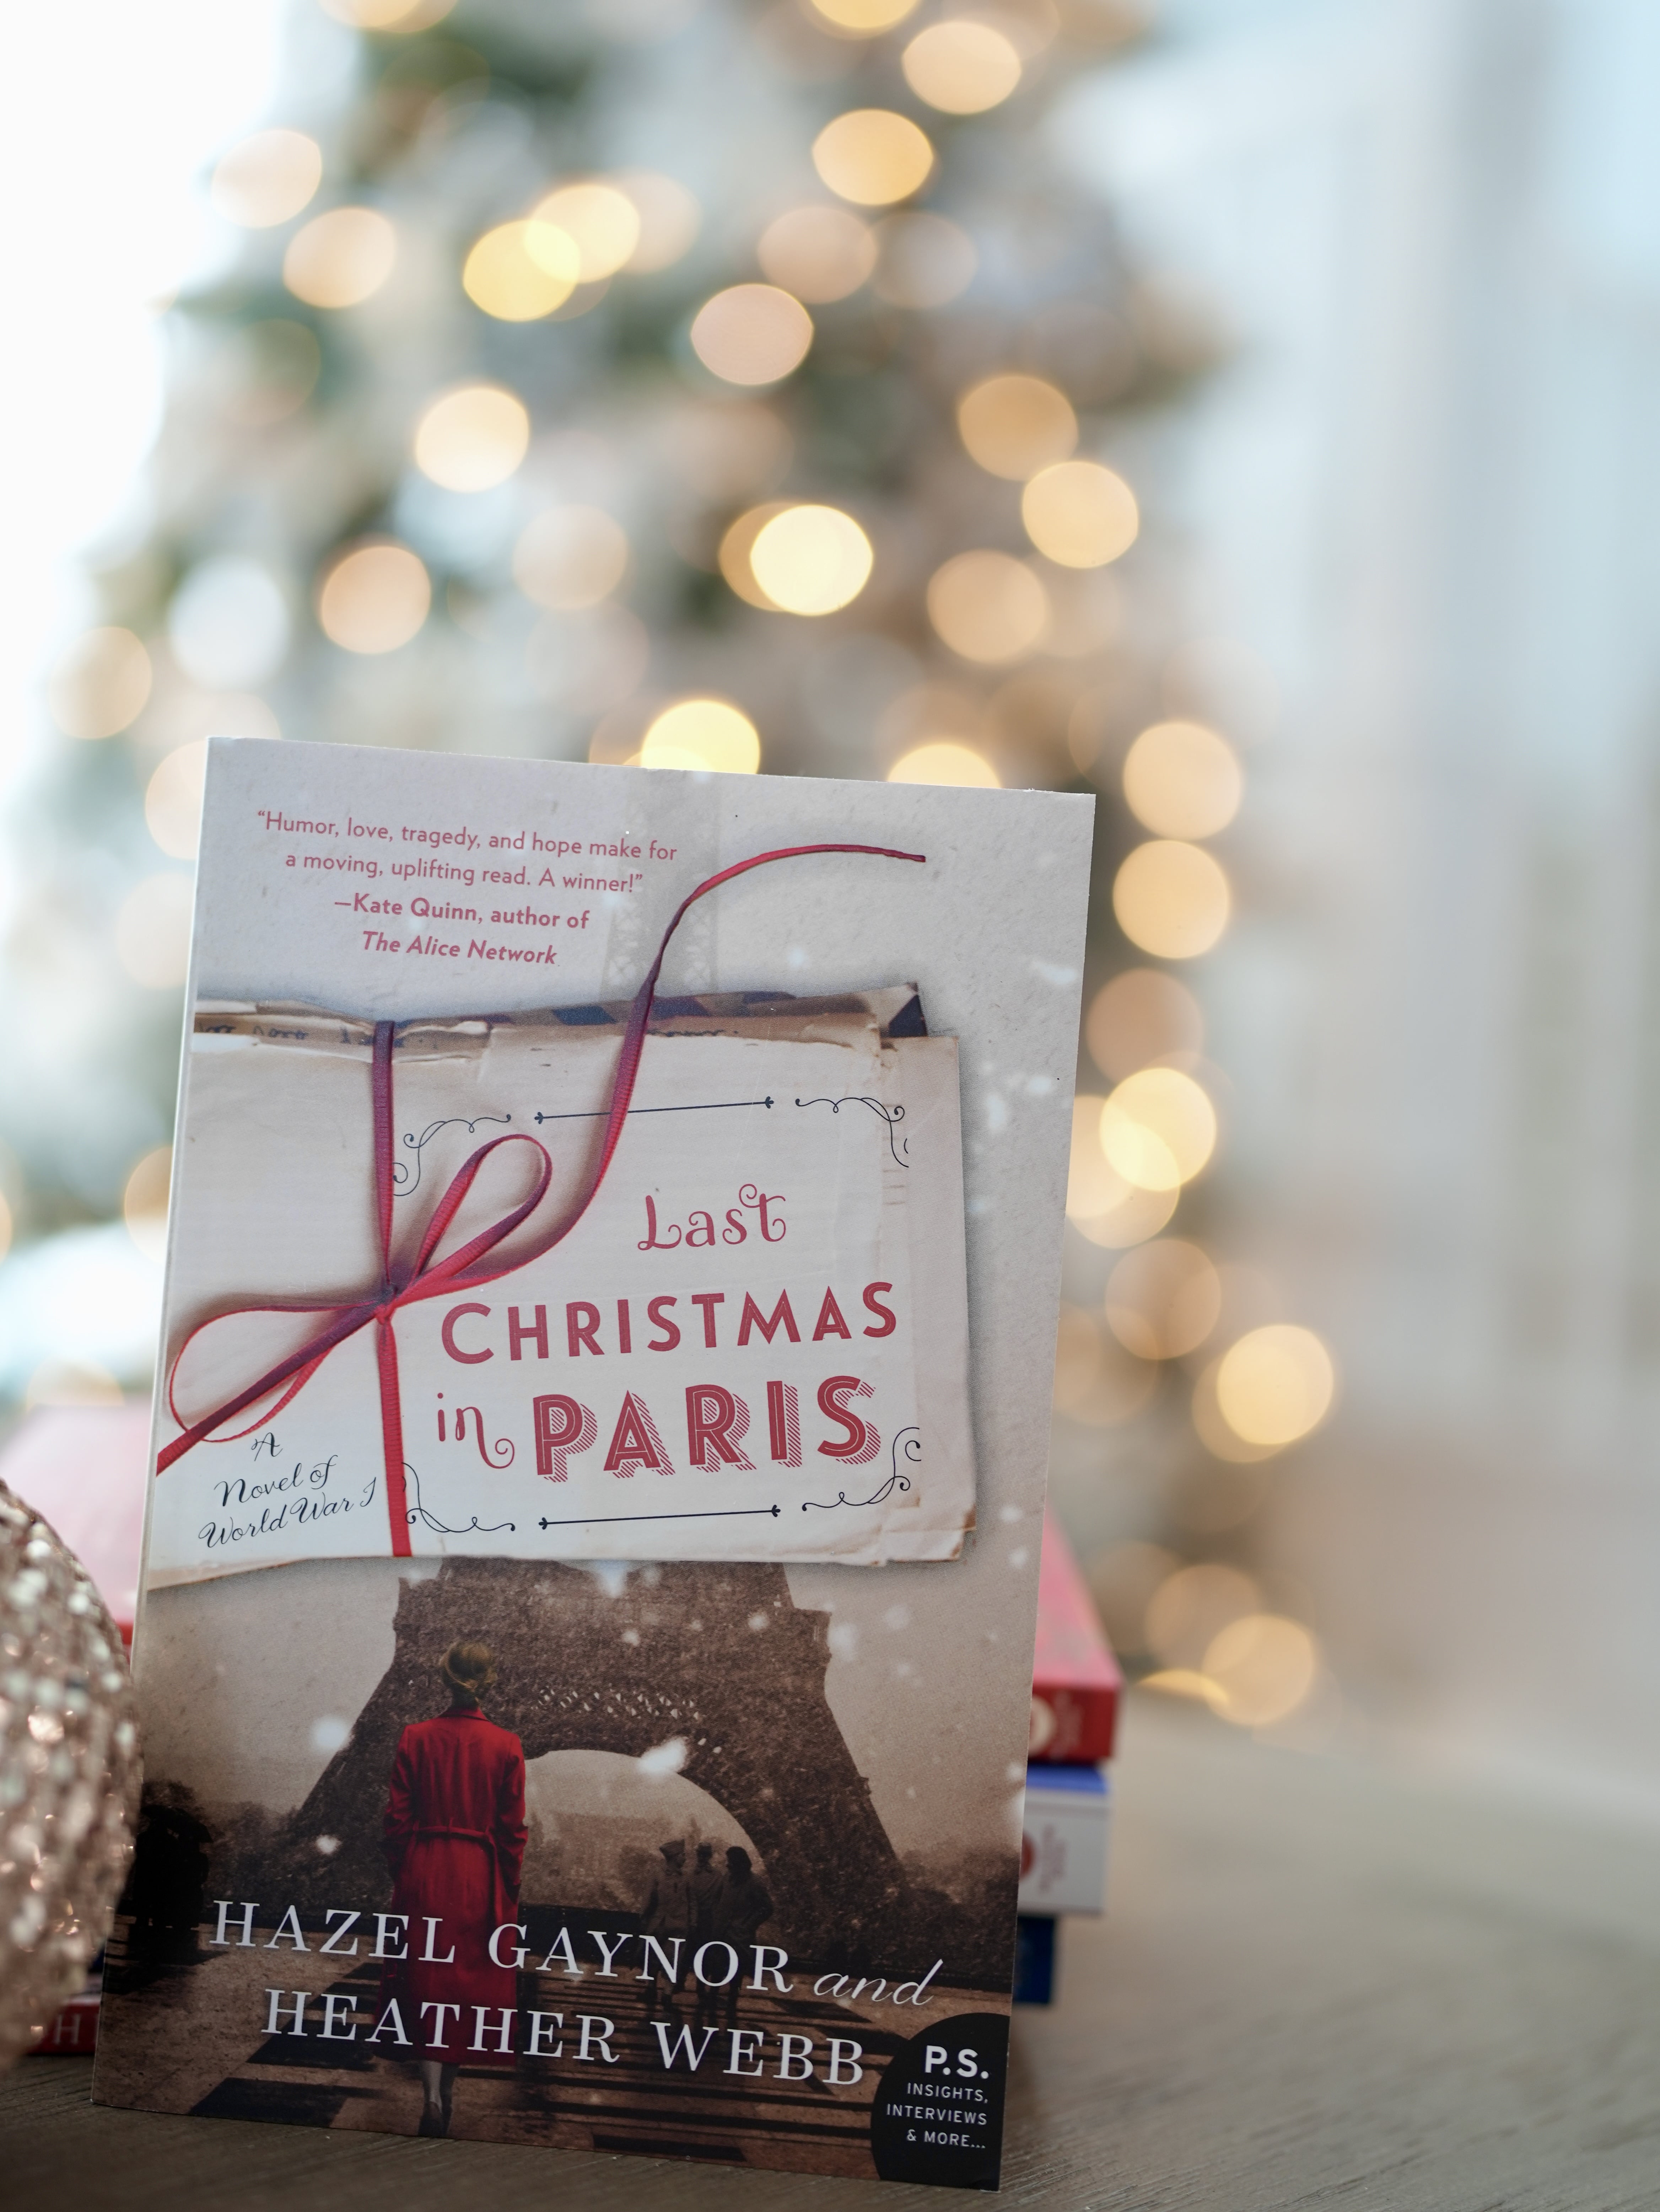 A book titled The Last Christmas in Paris, stands behind a stack of books on a brown table. A lit up Christmas tree is shown in the background.